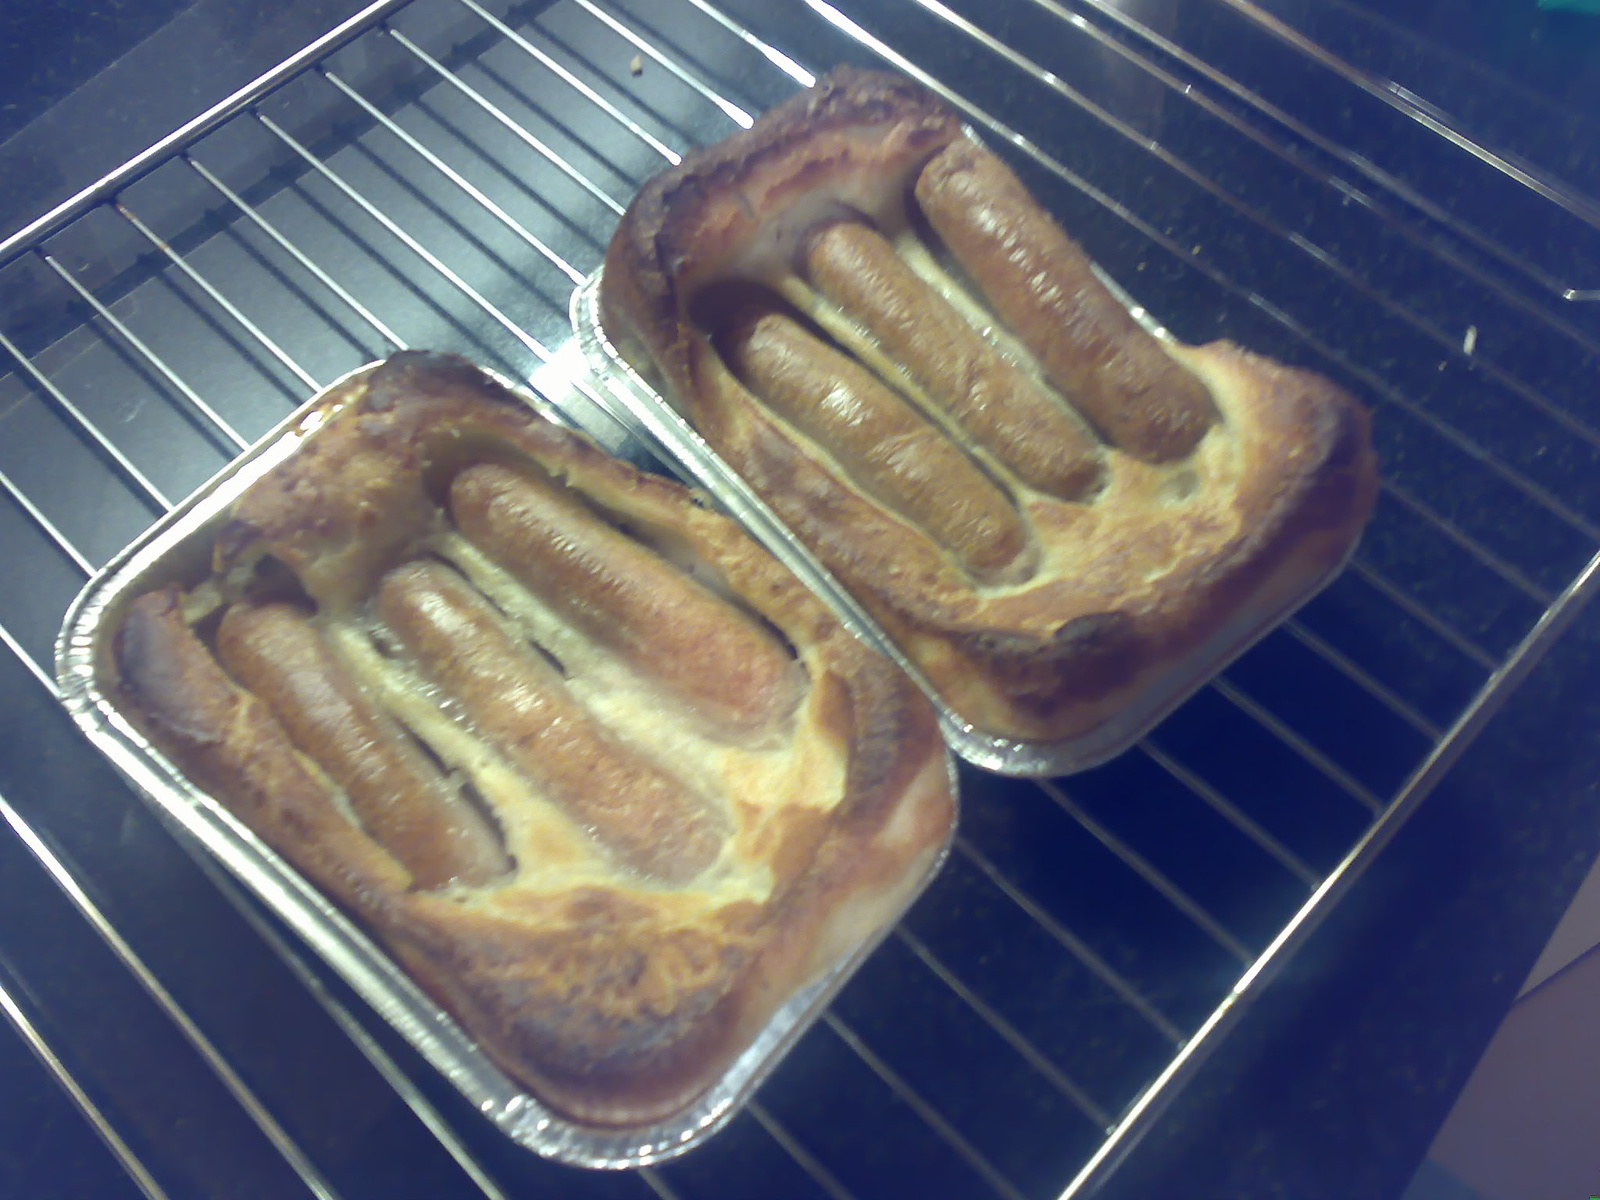 Toad in the Hole